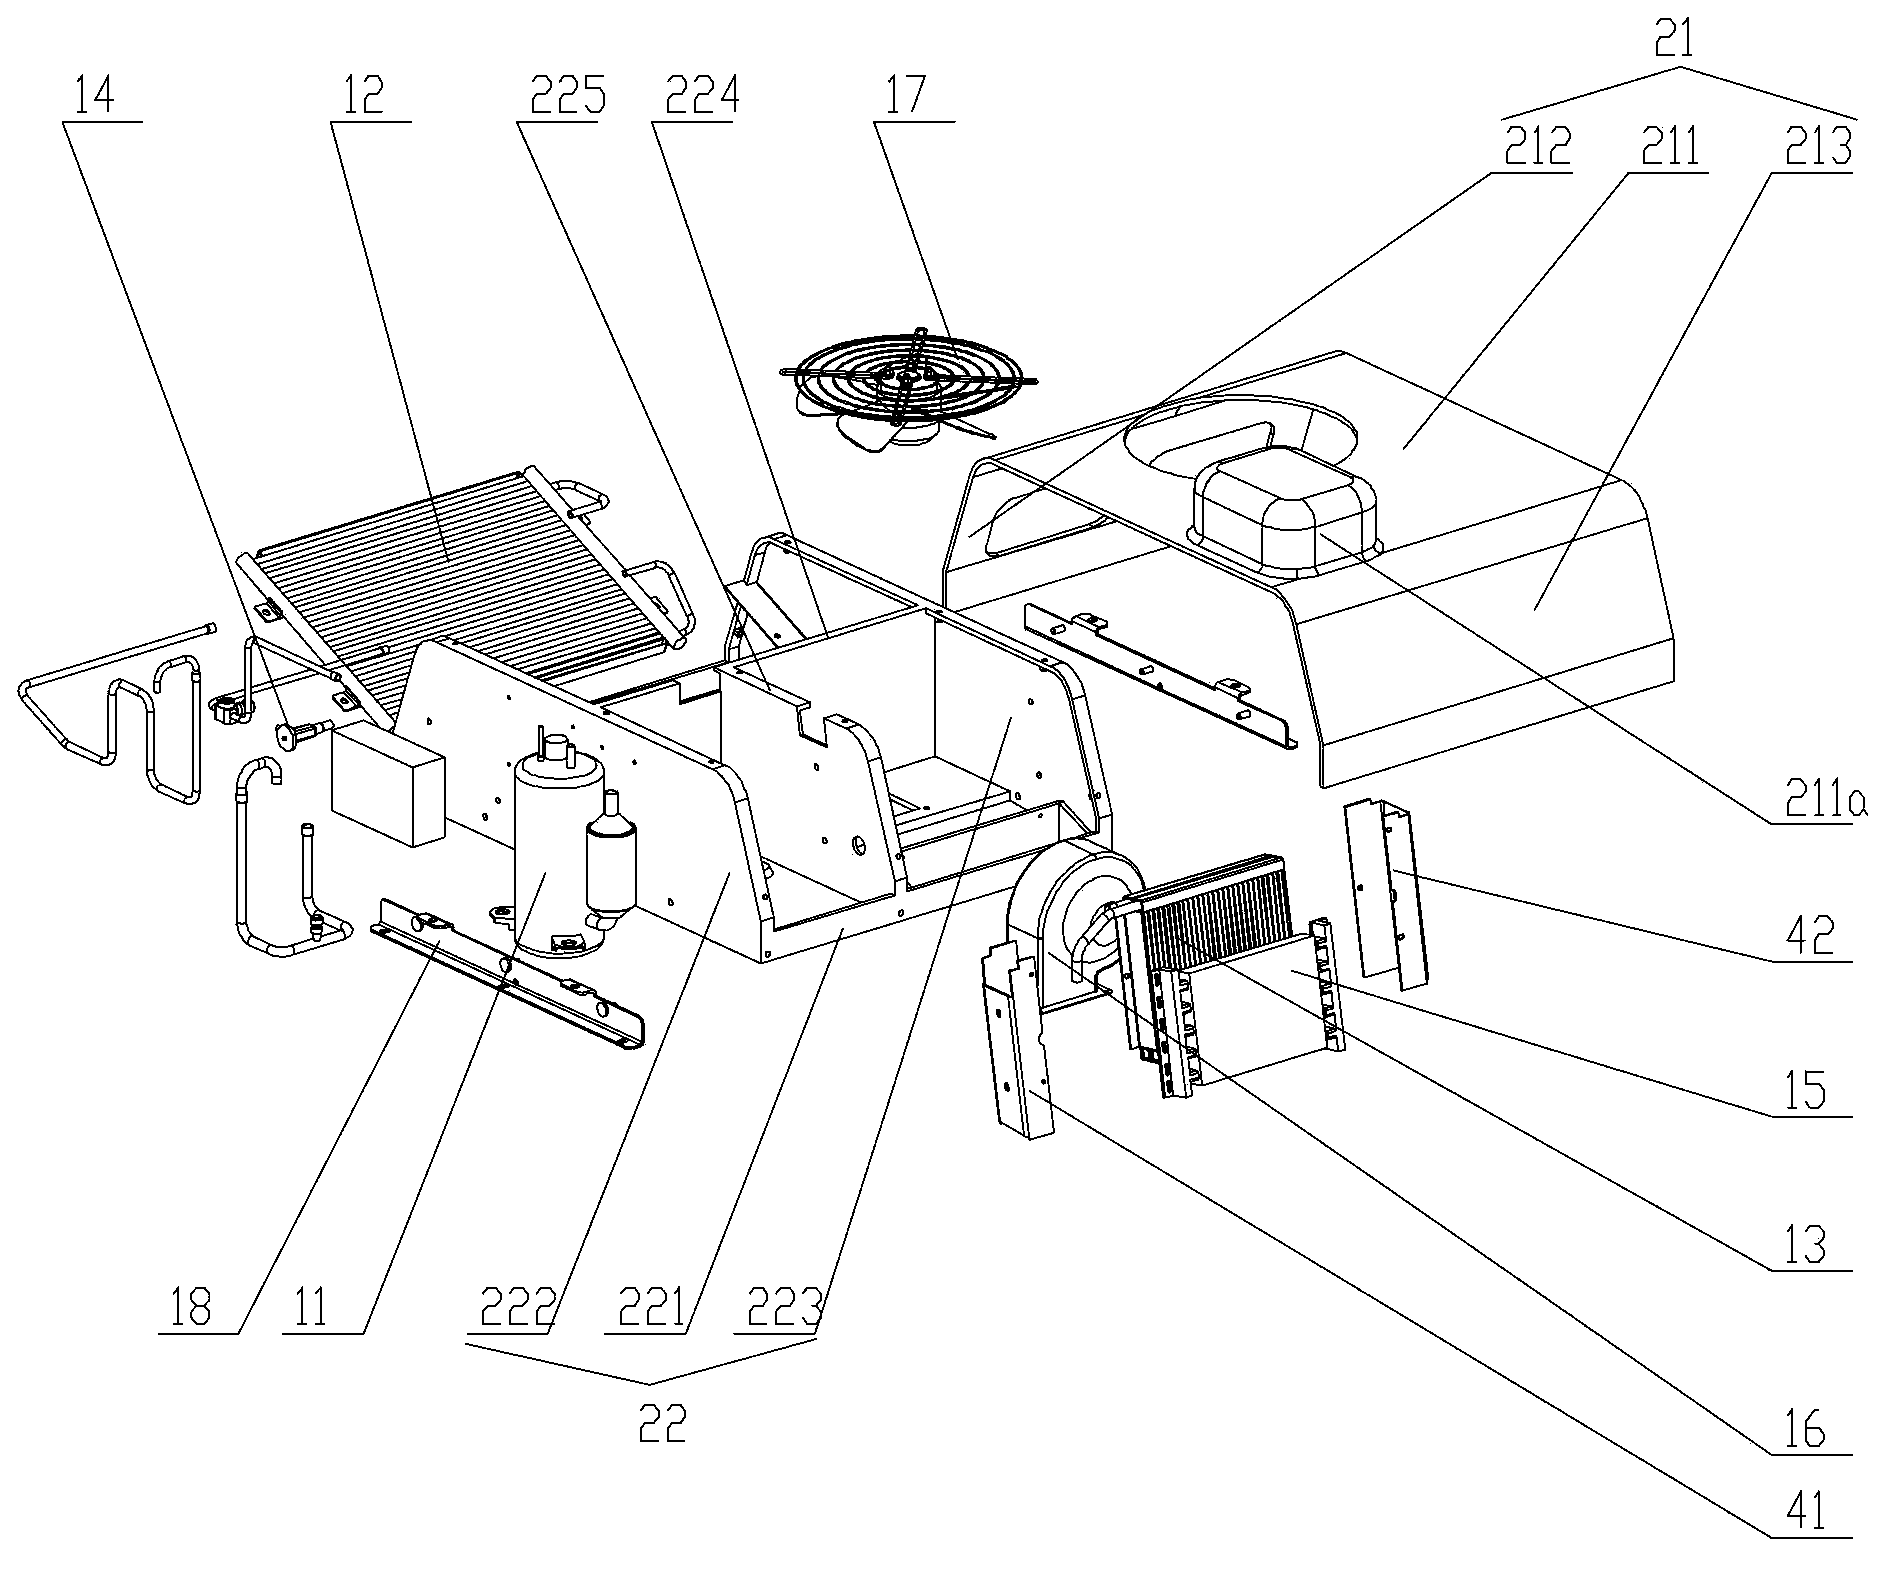 Mechanical equipment and air conditioning system thereof